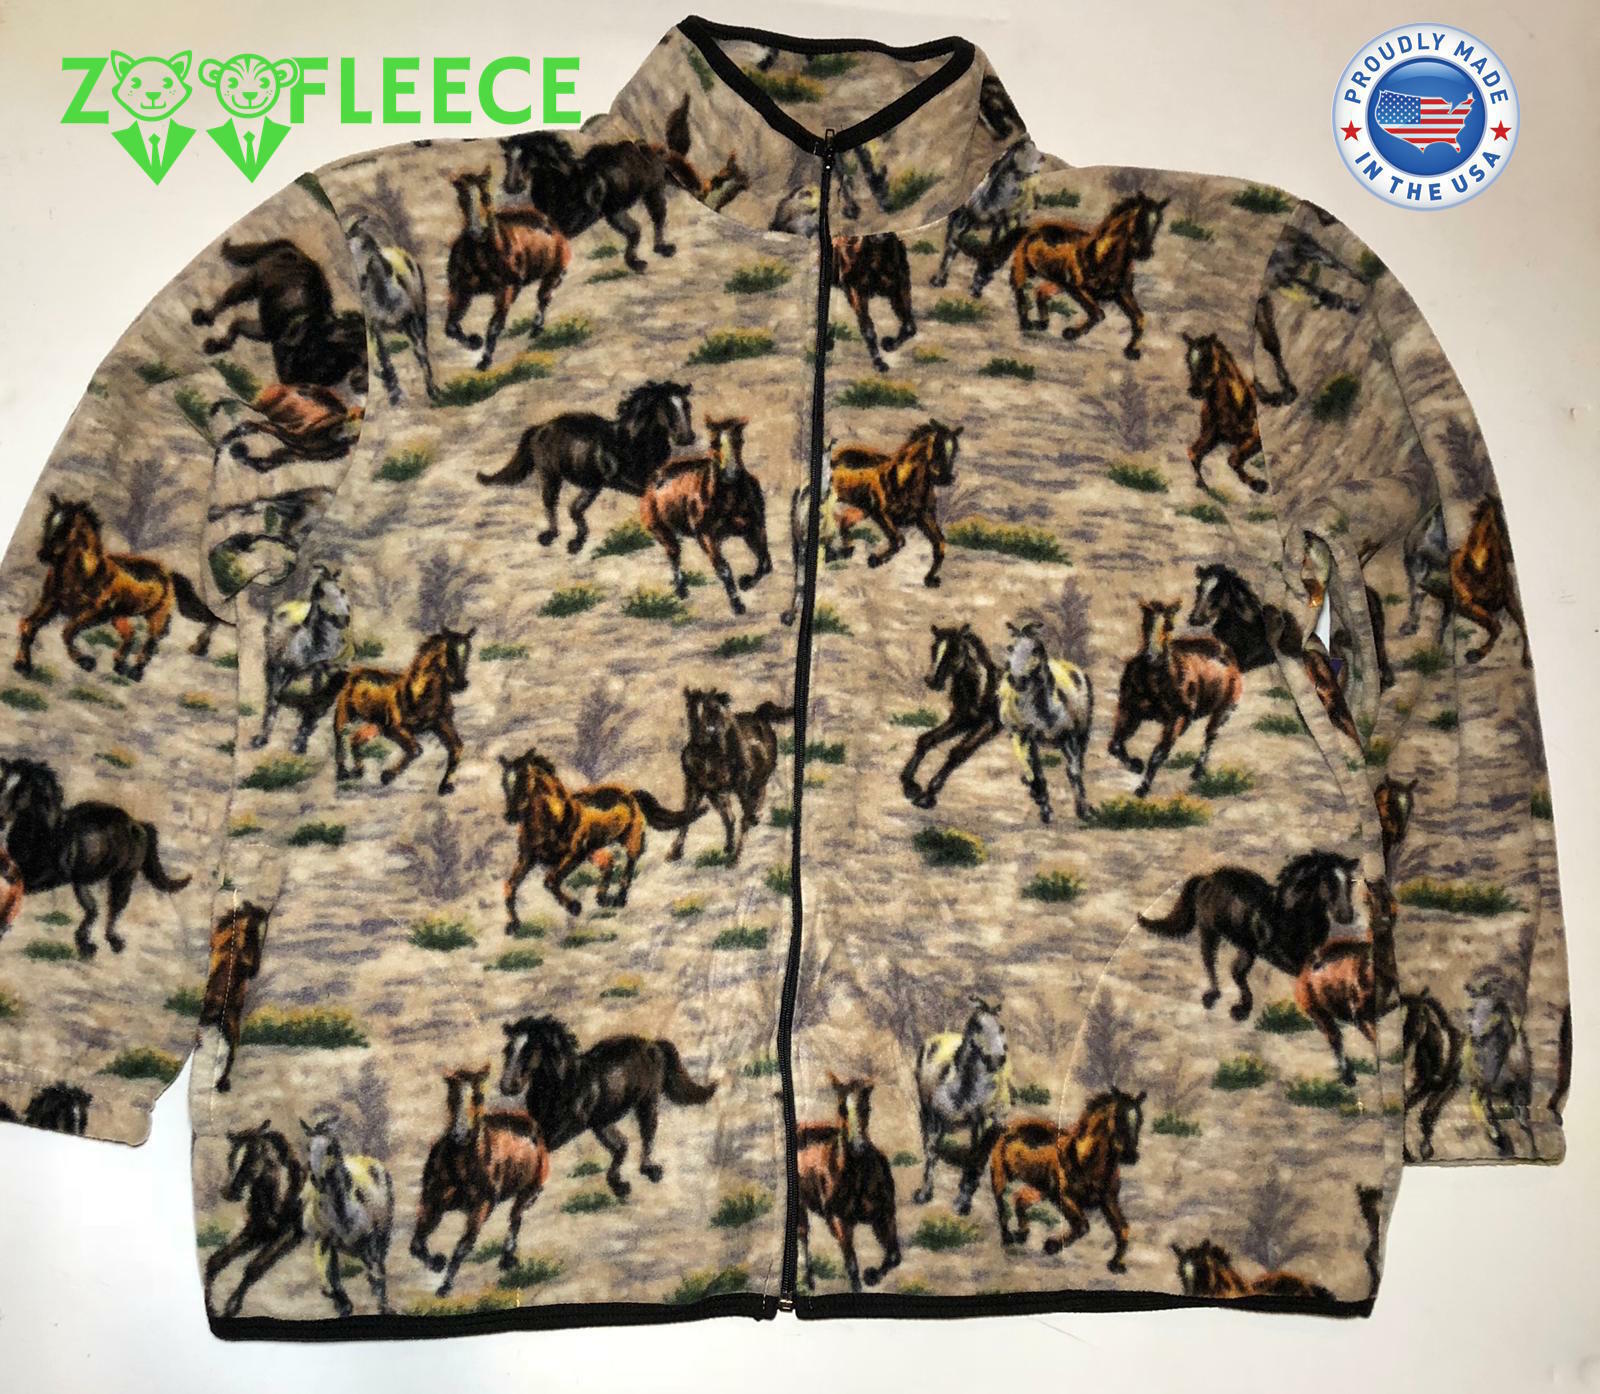 ZooFleece Women's Horse Riding Jacket Gift Horses Sweater Equestrian Mare L-XL